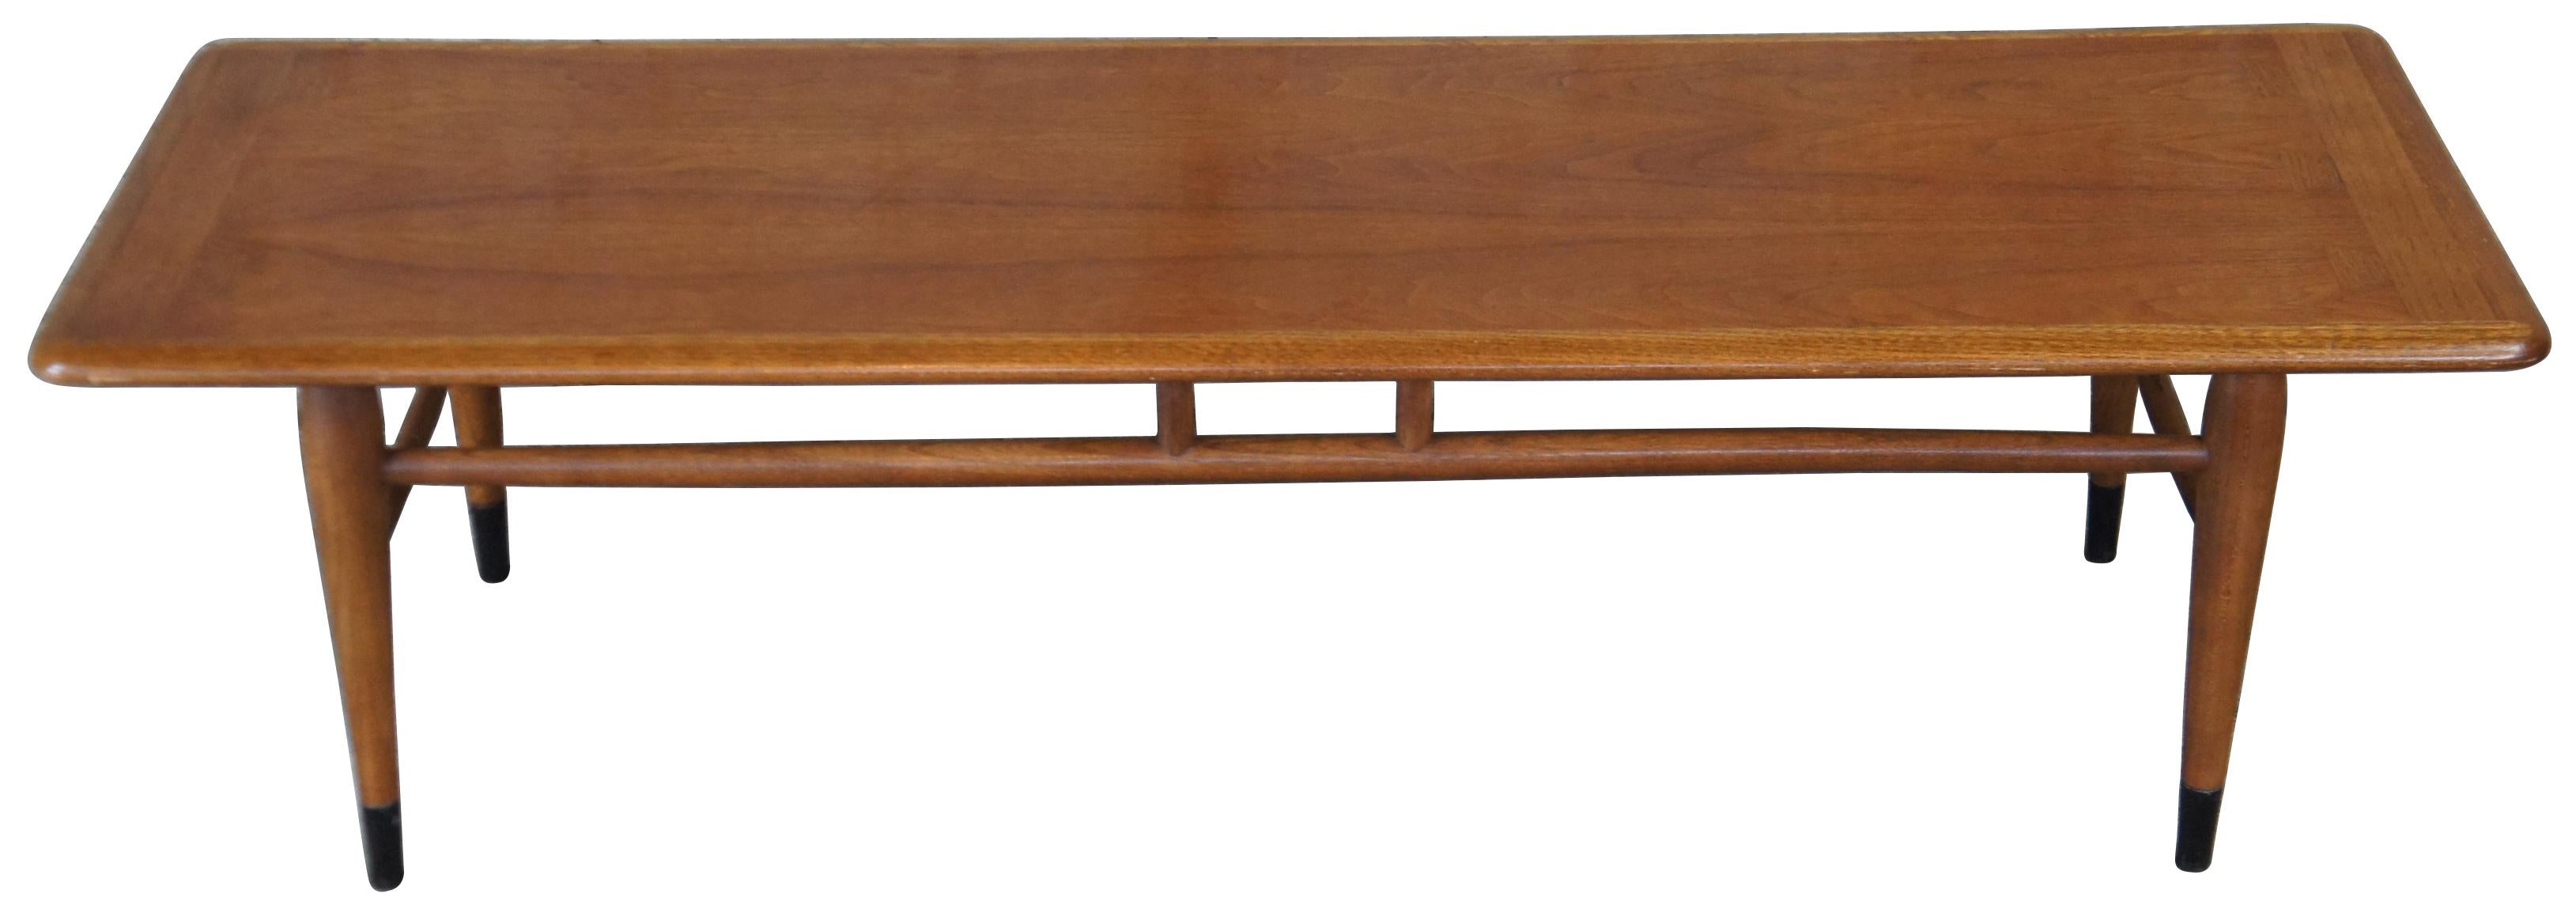 Circa 1966 Lane series 900-0 Acclaim coffee table. A rectangular form made from walnut with a two tone top featuring tongue and groove design. 
 